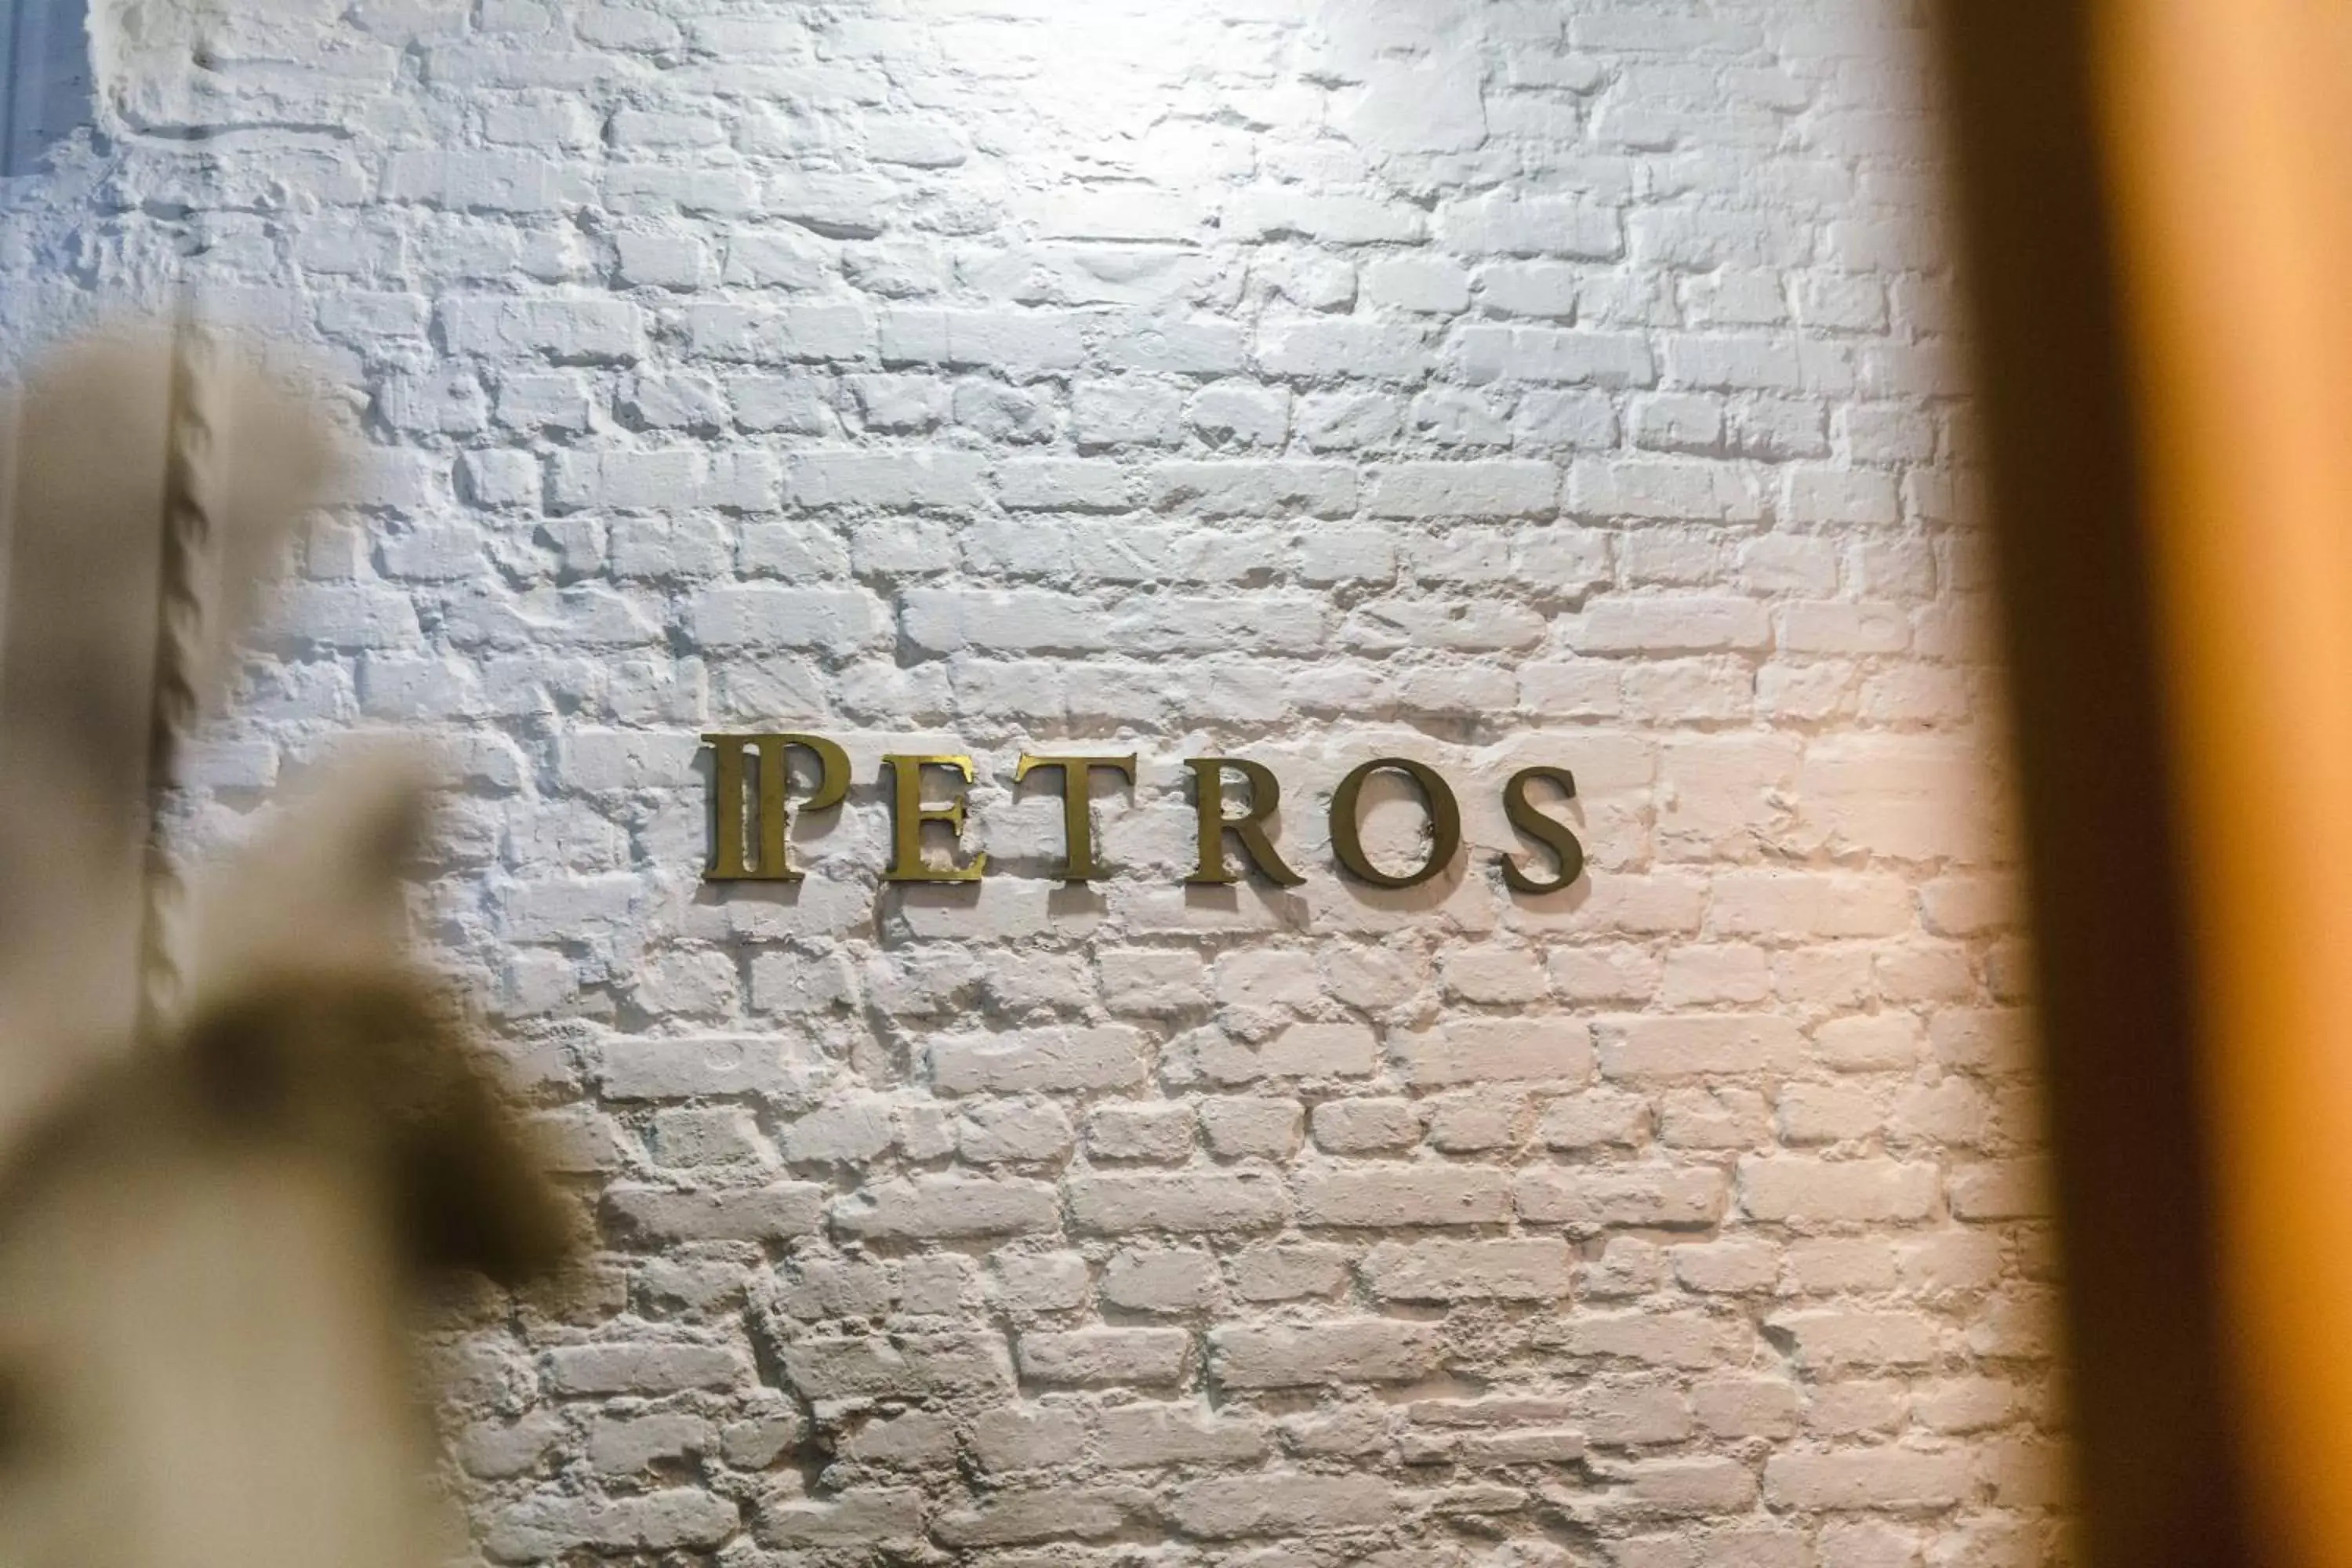 Property logo or sign in Petros Hotel